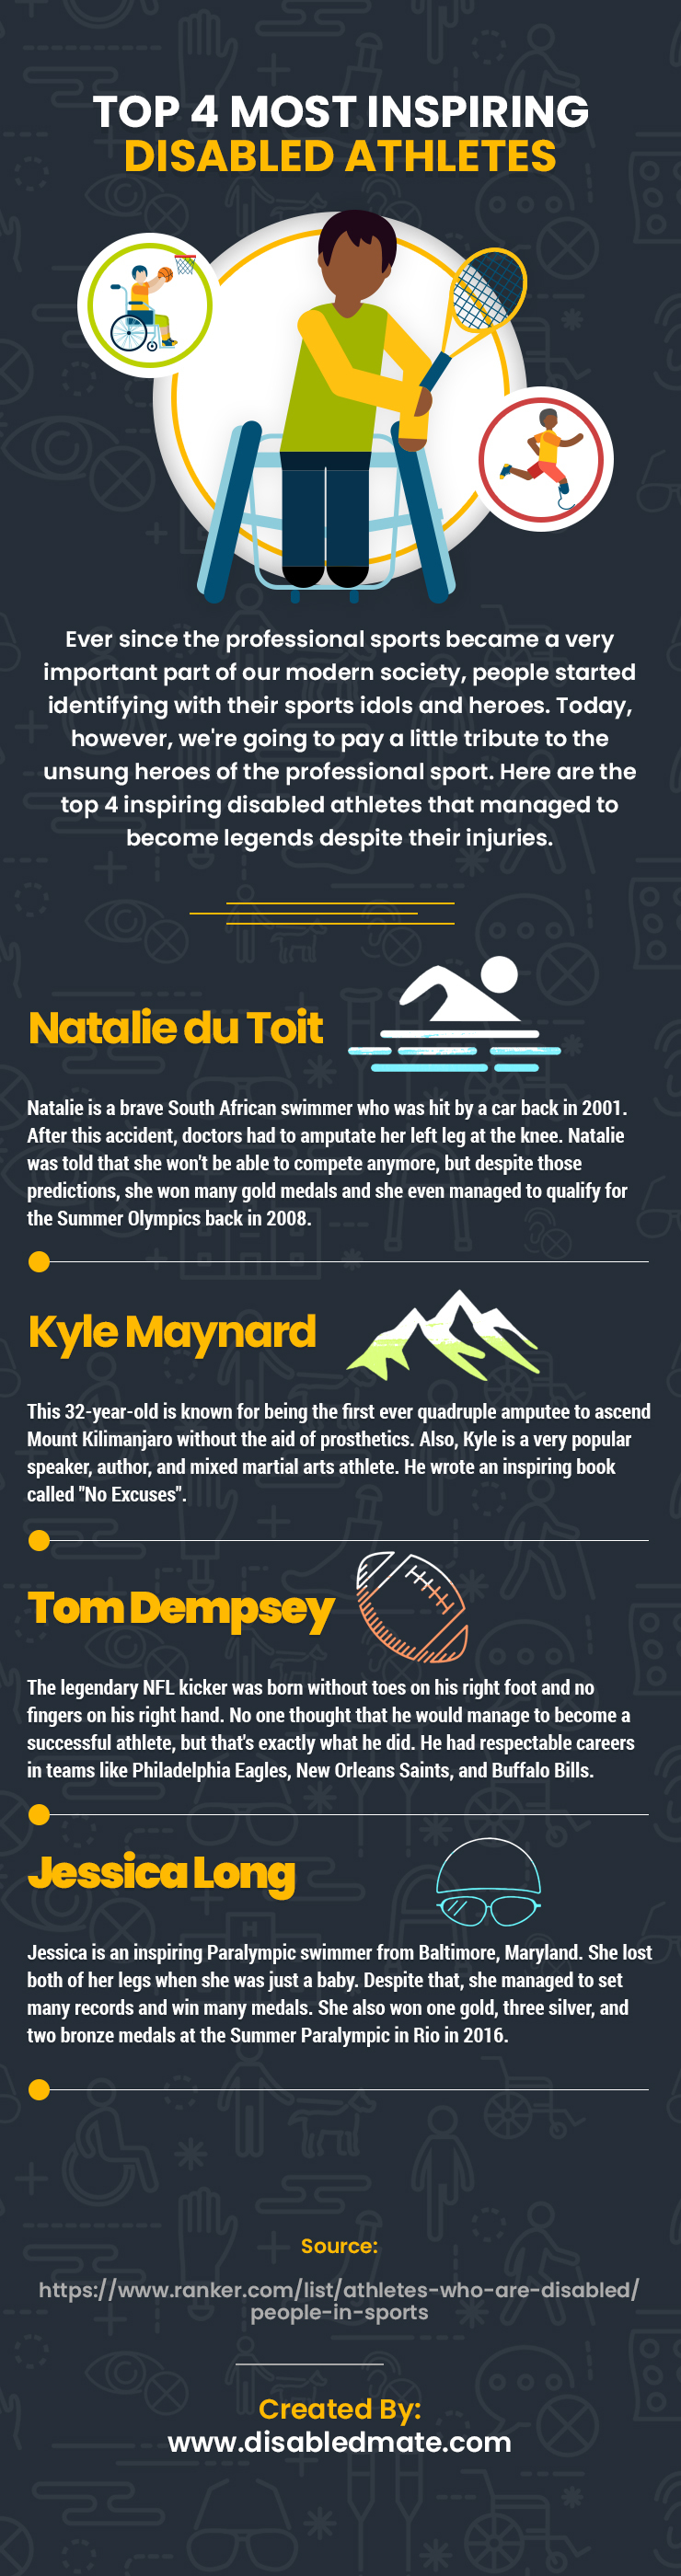 Top 4 Most Inspiring Disabled Athletes